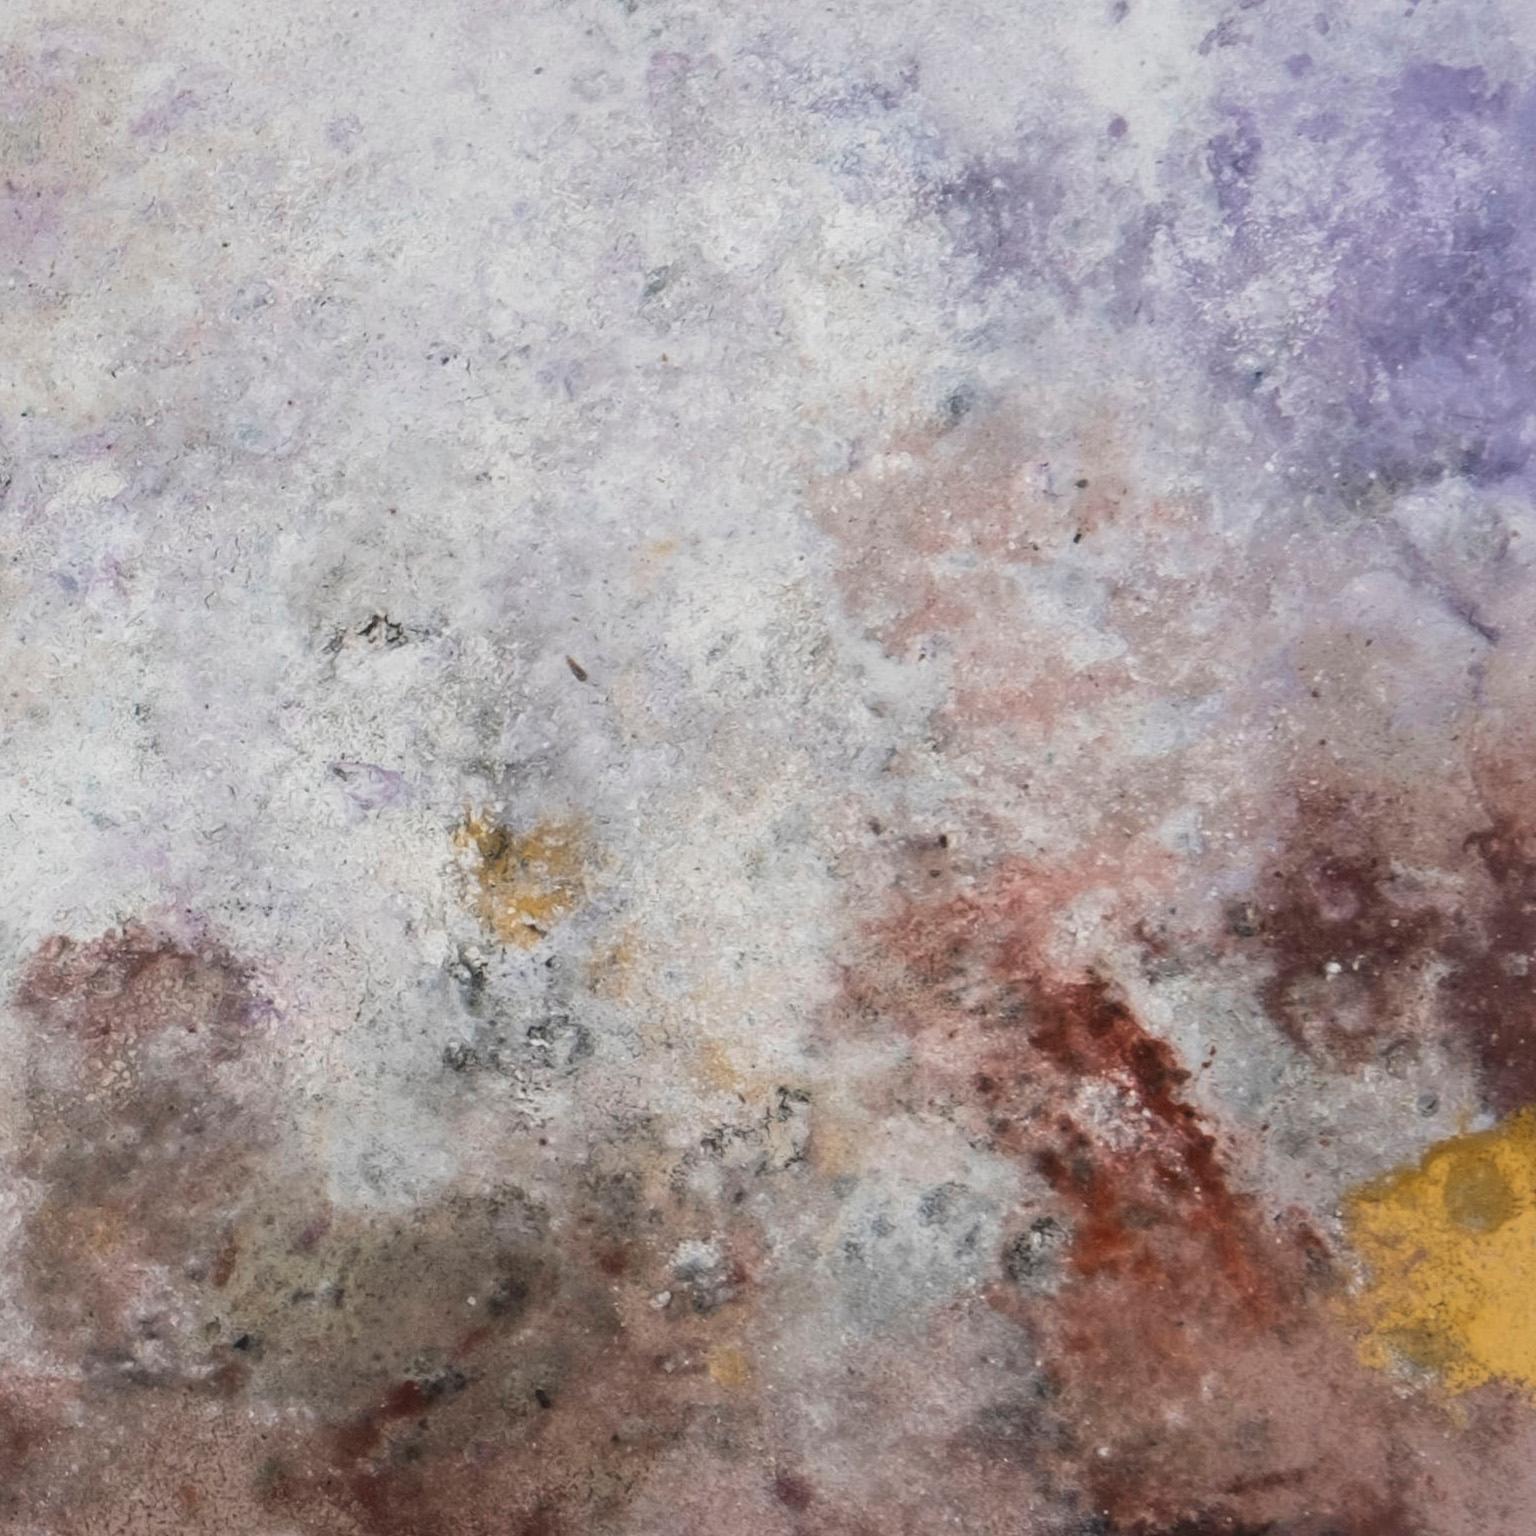 Terra Bruciata #14 (Scorched Earth) - Abstract Blue, Purple, and Red Painting 3